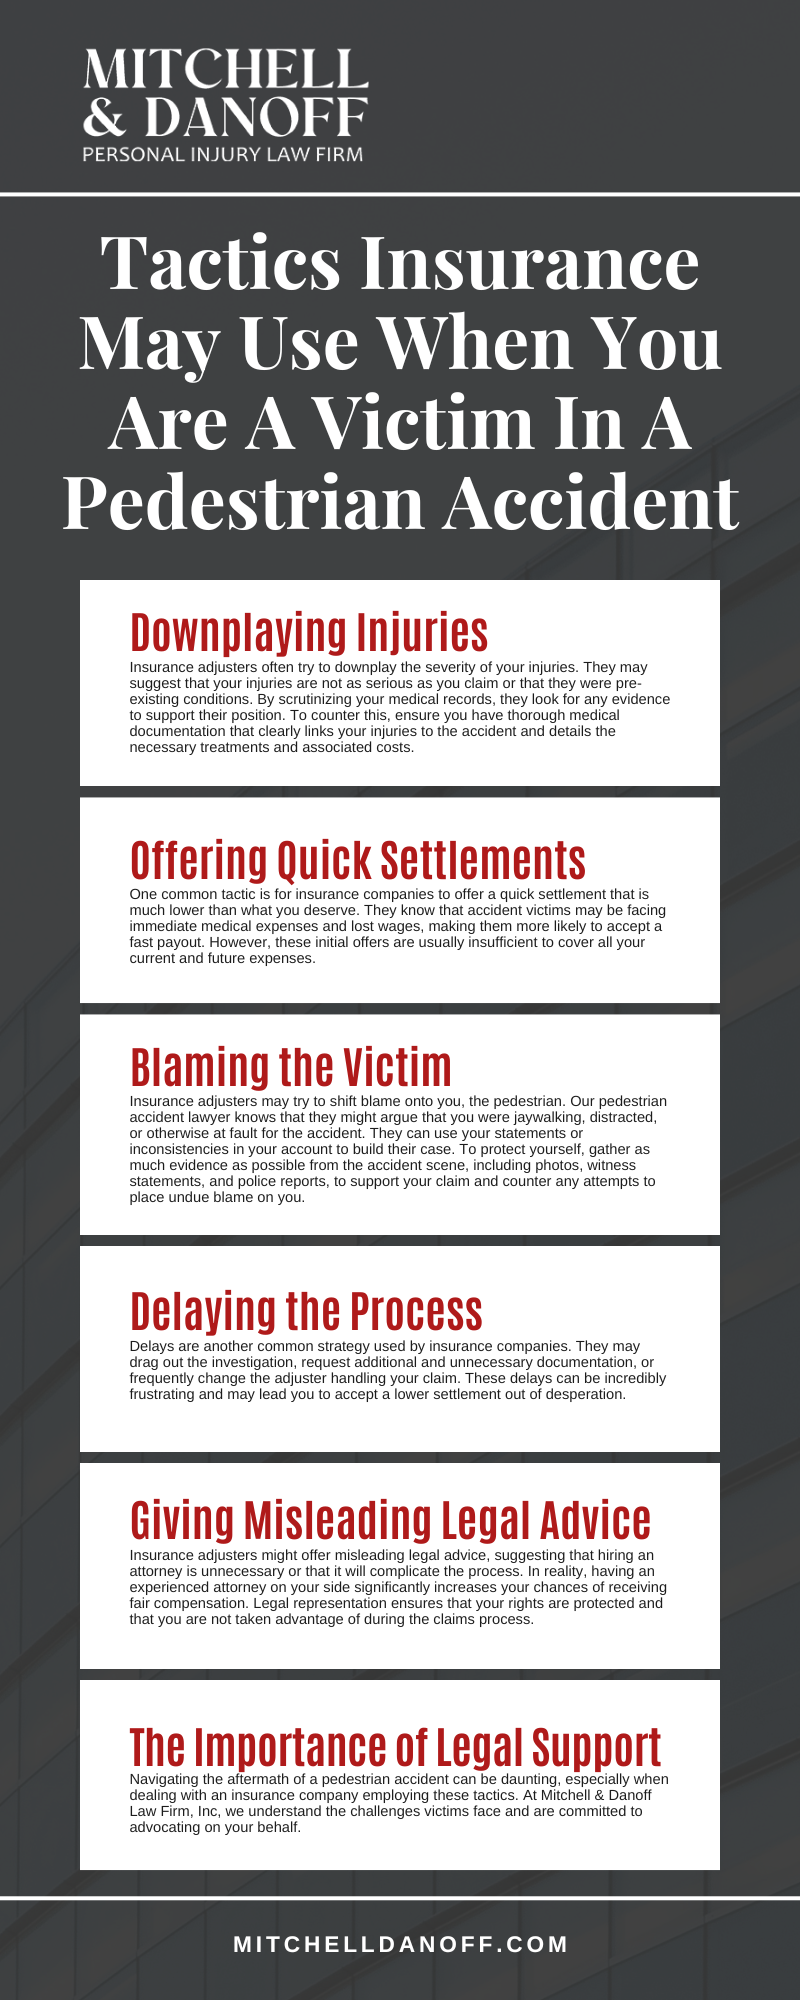 Tactics Insurance May Use When You Are A Victim In A Pedestrian Accident Infographic